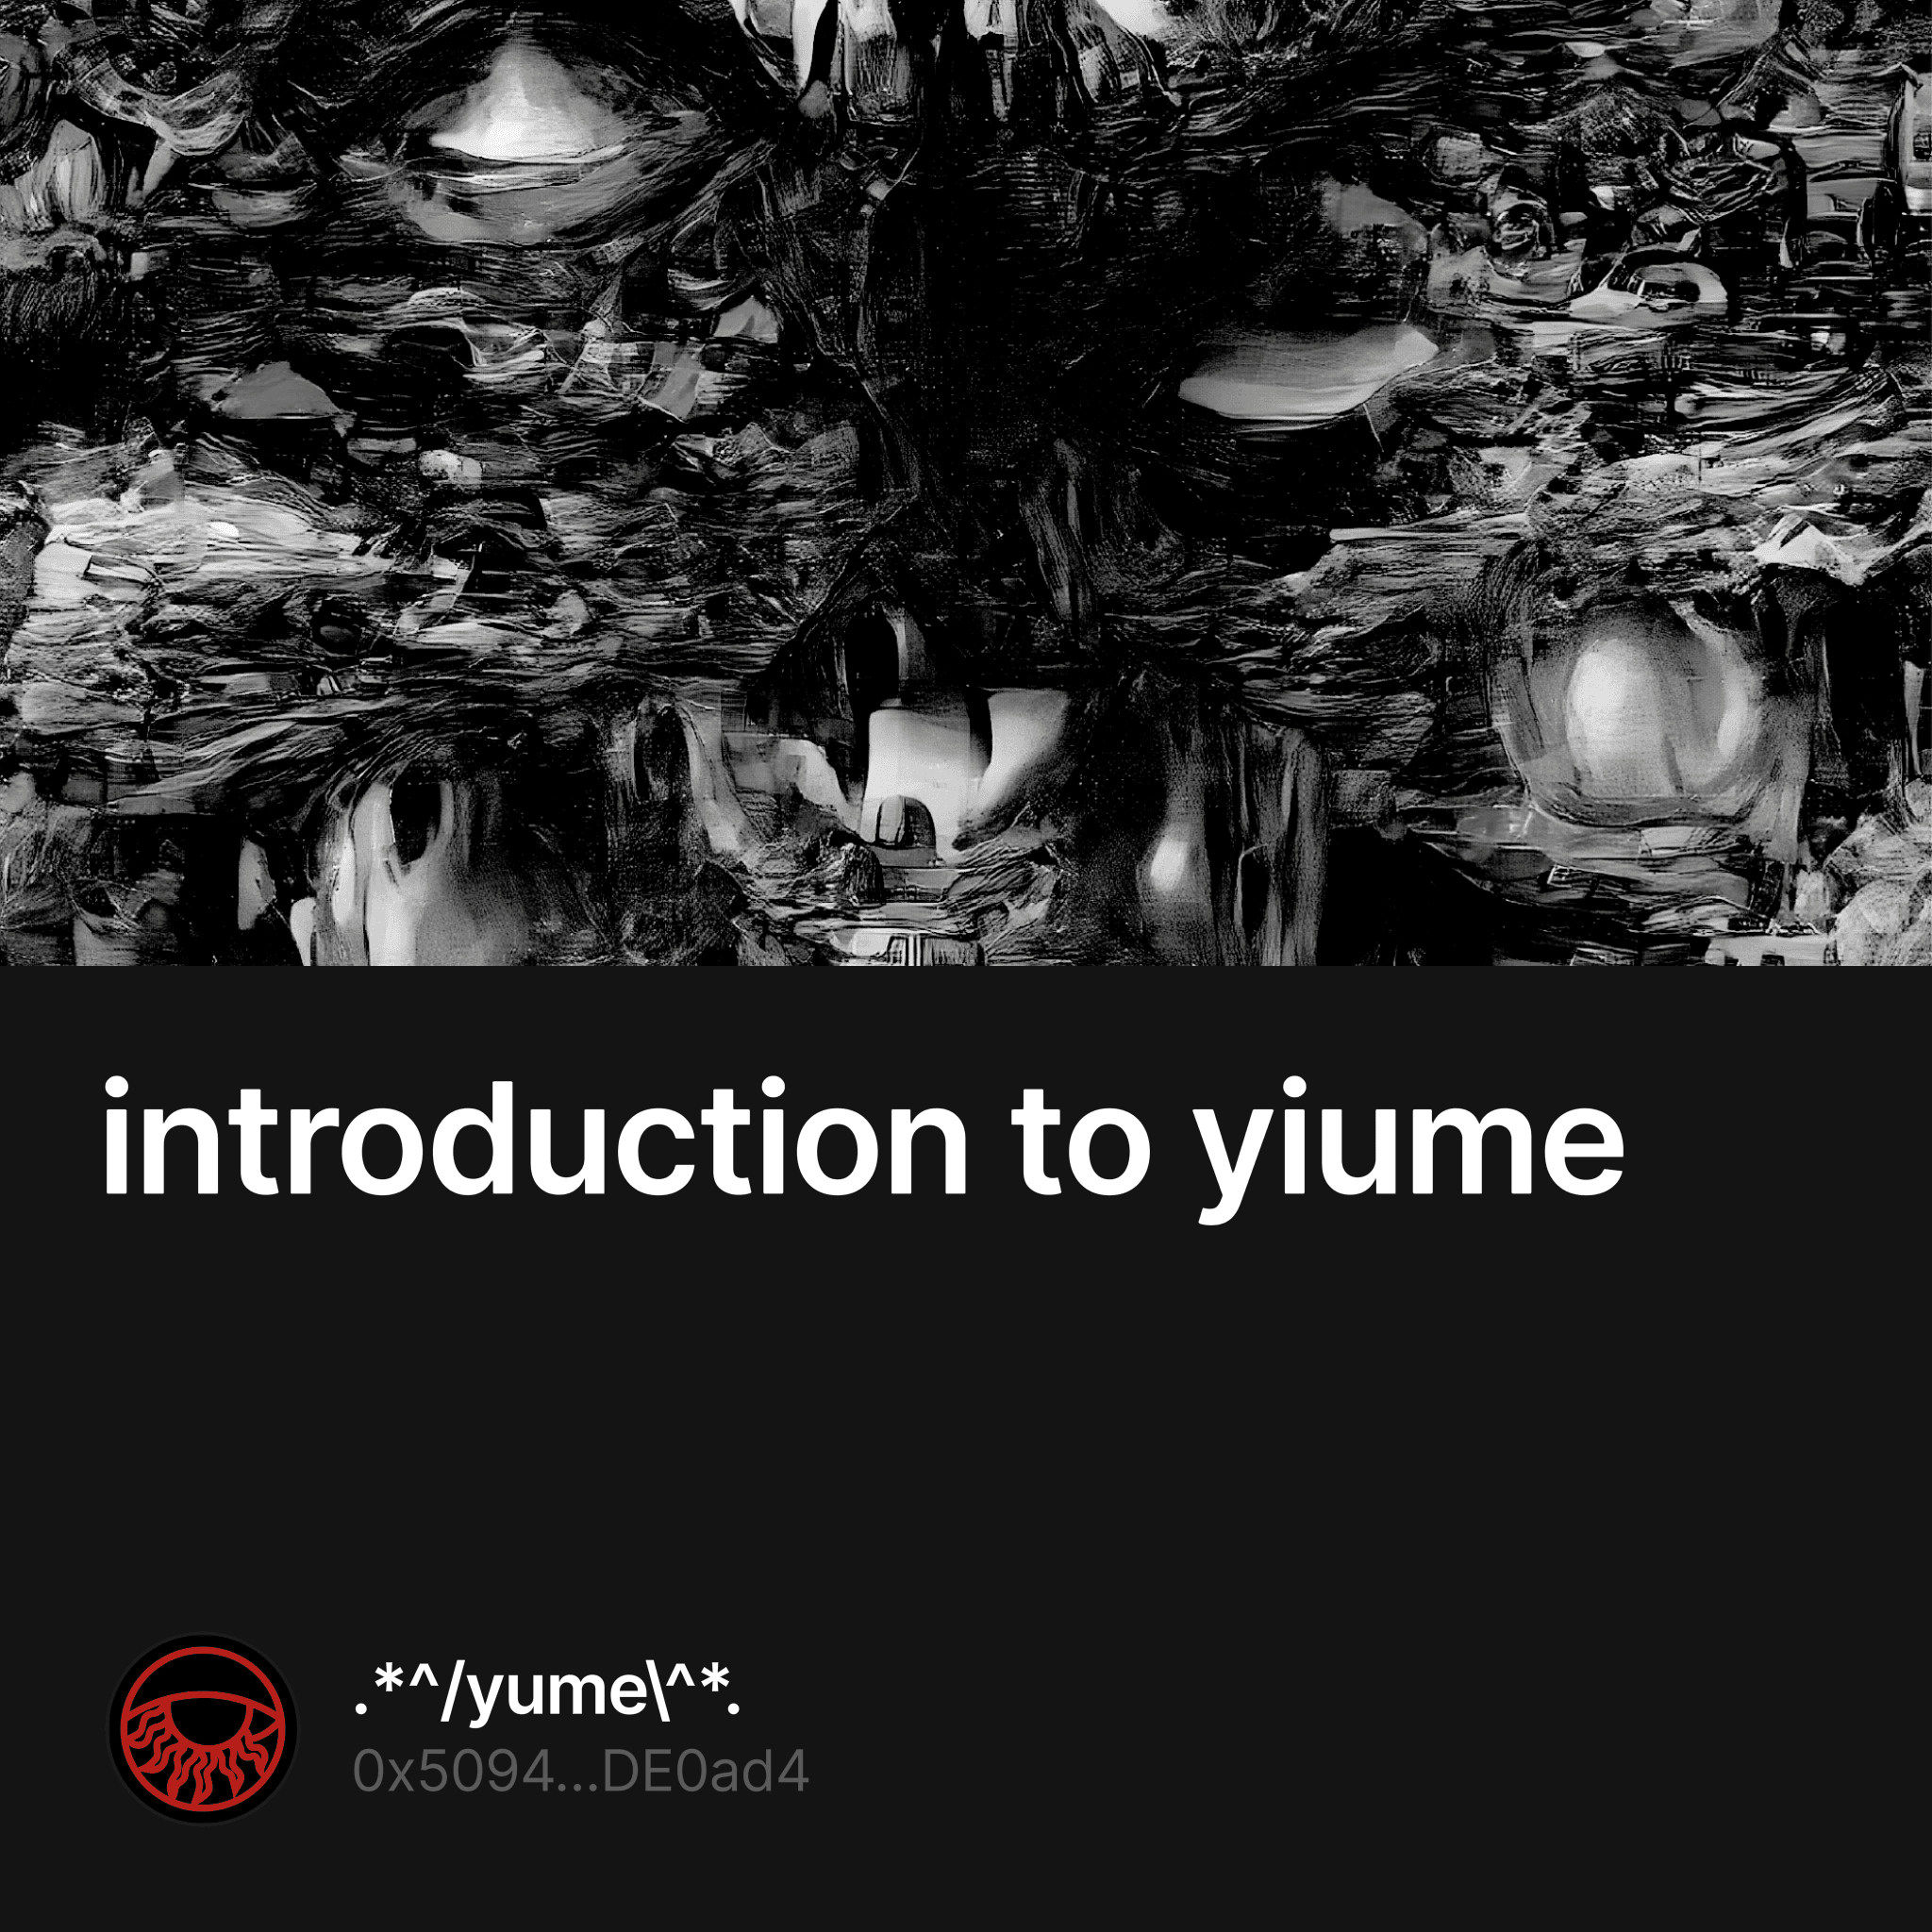 introduction to yiume 23/500